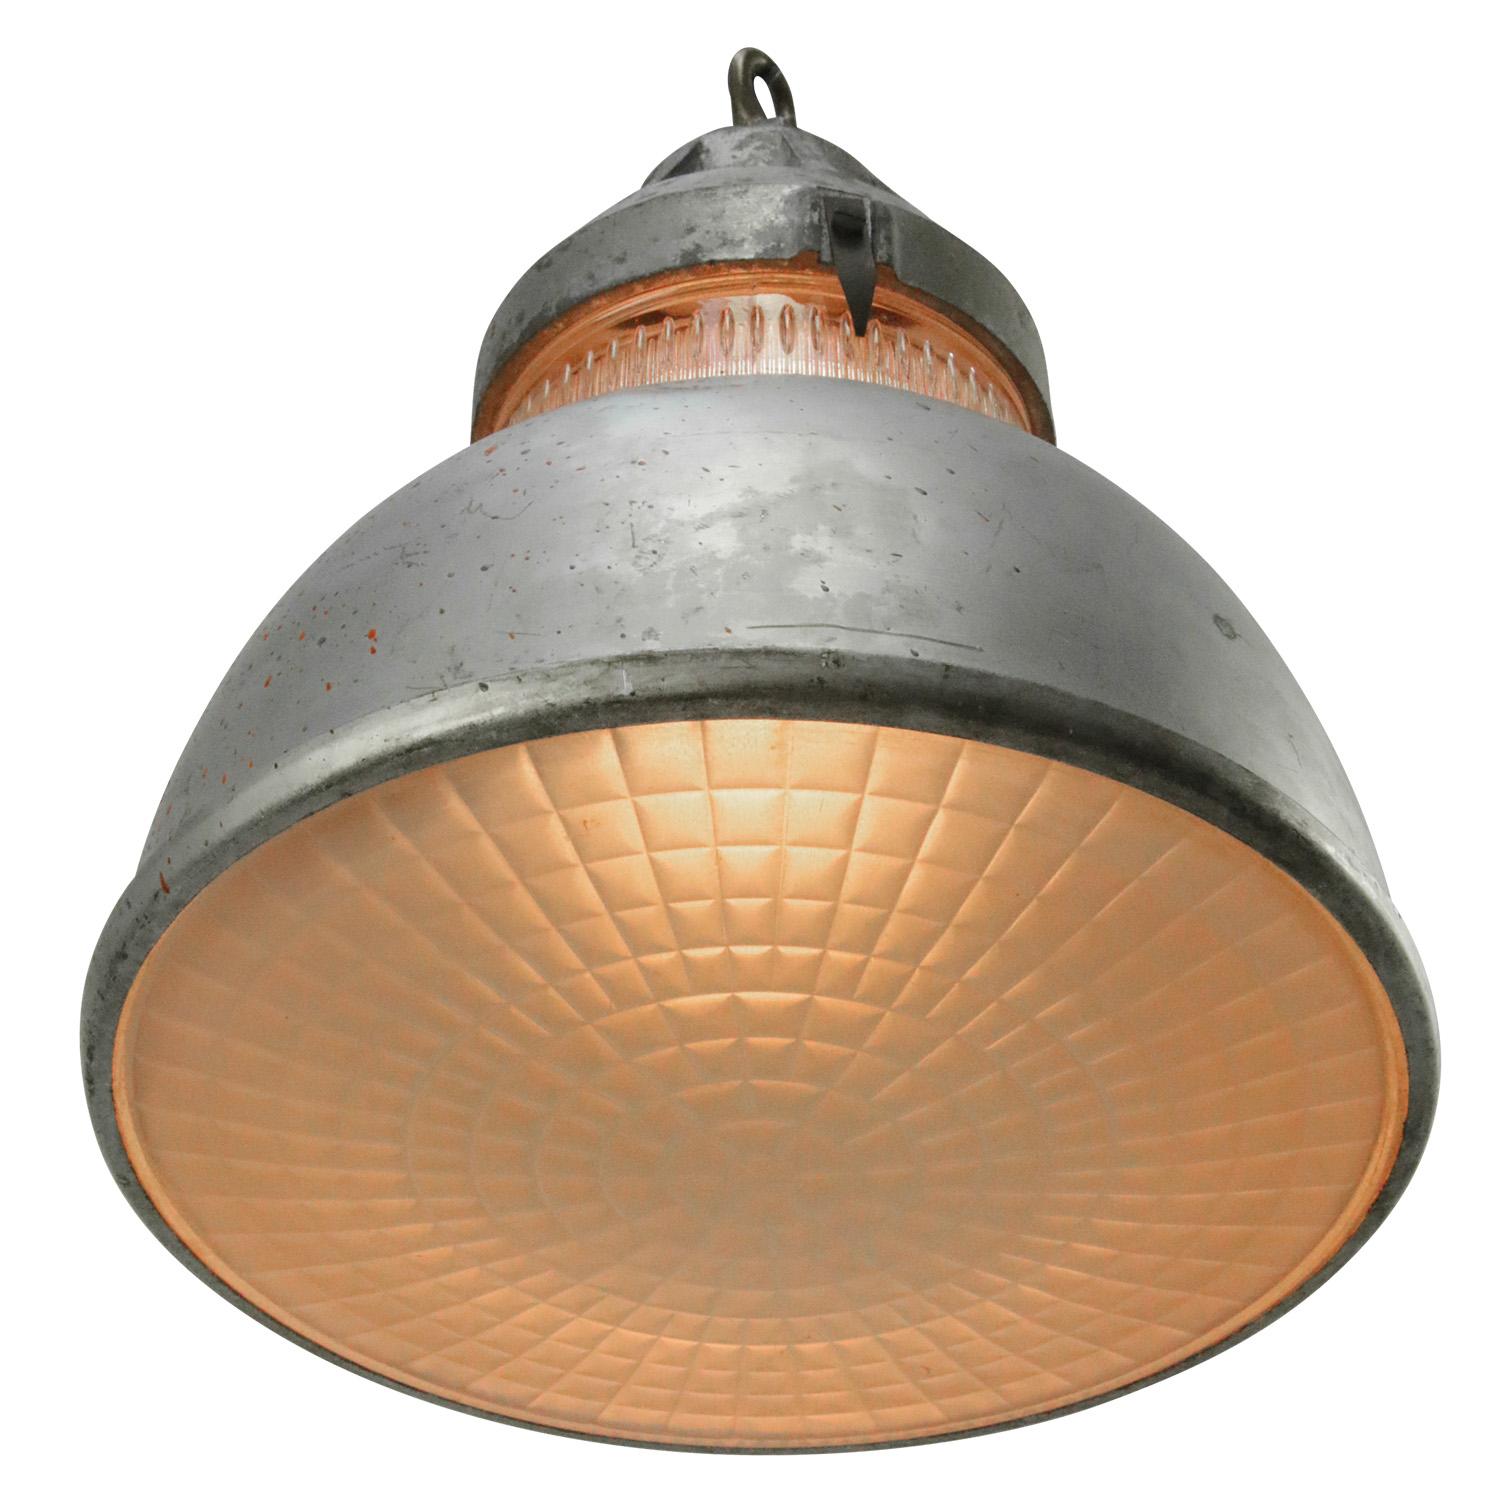 Industrial pendant lamp by Holophane Paris.
Grey metal shade with clear striped / holophane glass.
Brass top.

Measures: weight 4.20 kg / 9.3 lb

Priced per individual item. All lamps have been made suitable by international standards for